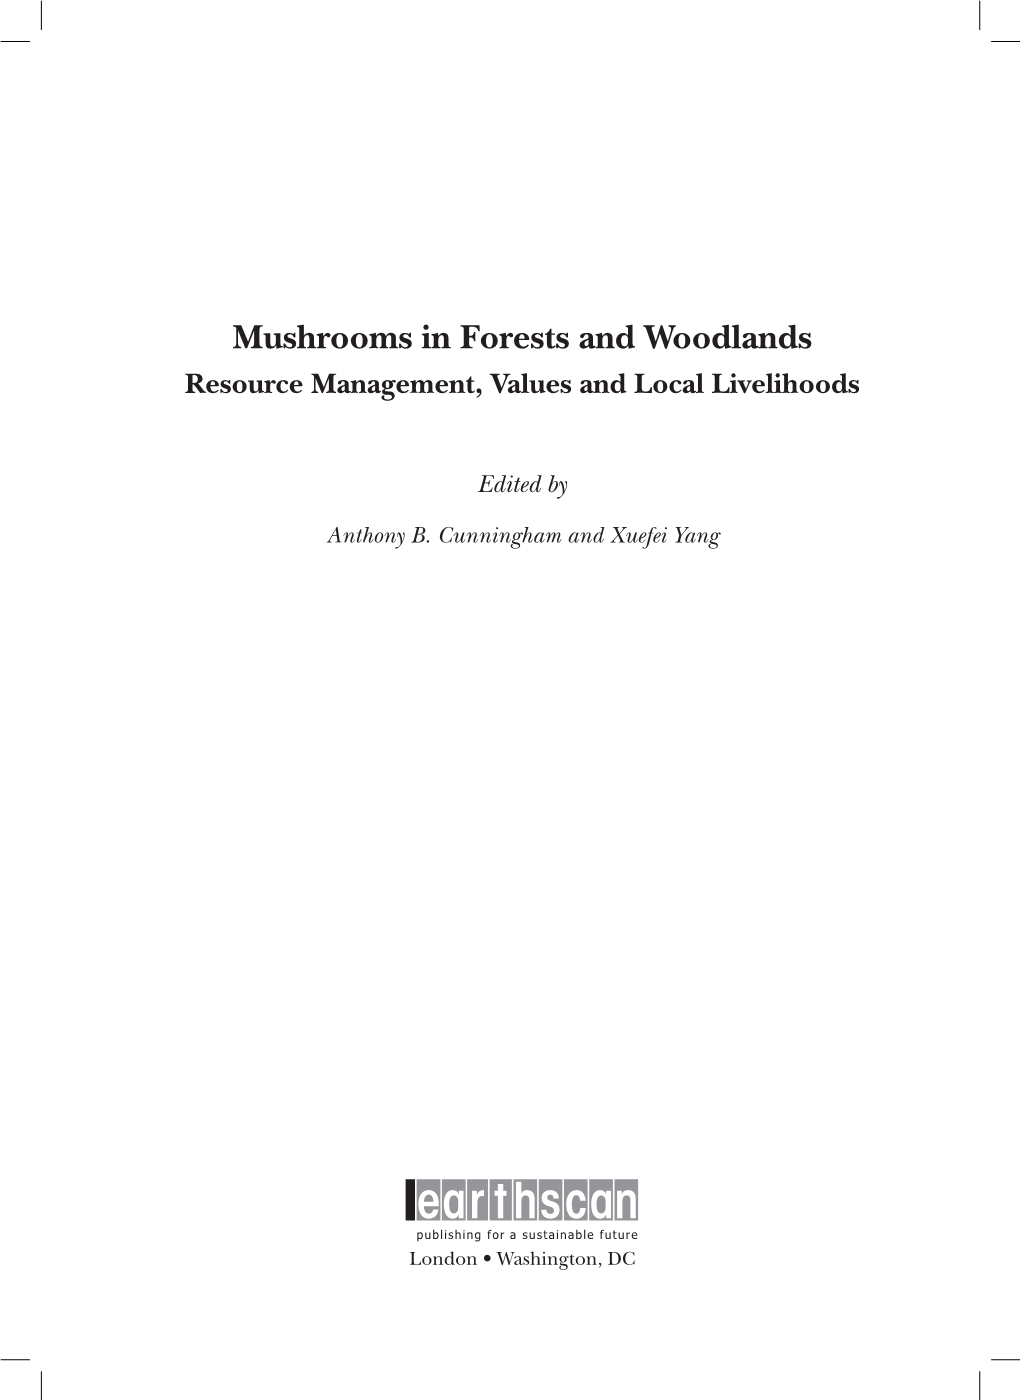 Mushrooms in Forests and Woodlands Resource Management, Values and Local Livelihoods